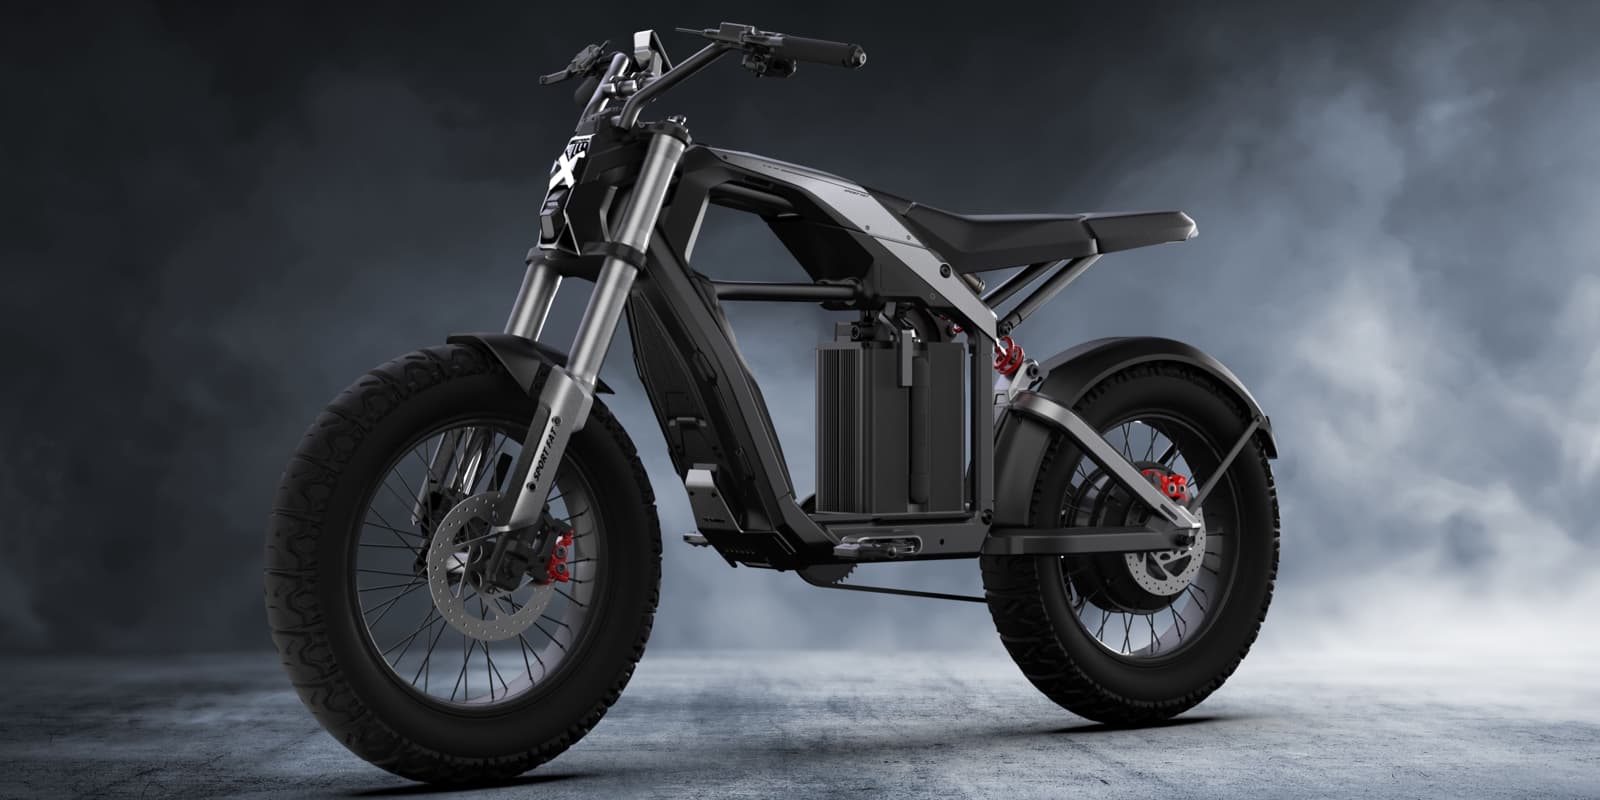 Segway unveils two new e-bikes, and one looks like a motorcycle